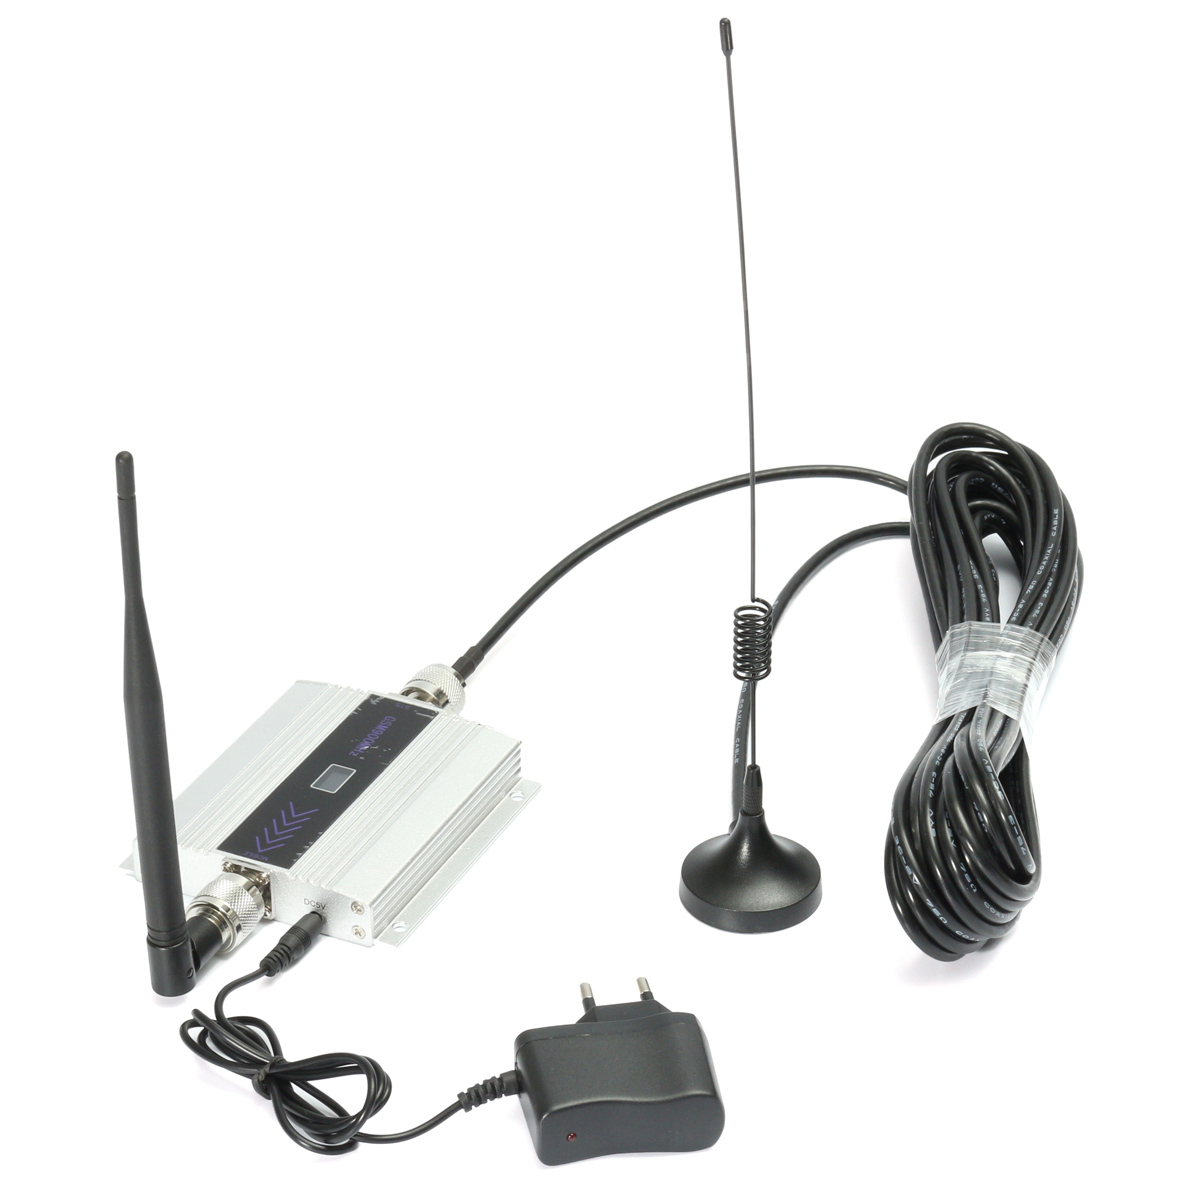 

2G GSM 900mhz LCD Cellphone Signal Booster Repeater Amplifier Kit With Sucker Antenna